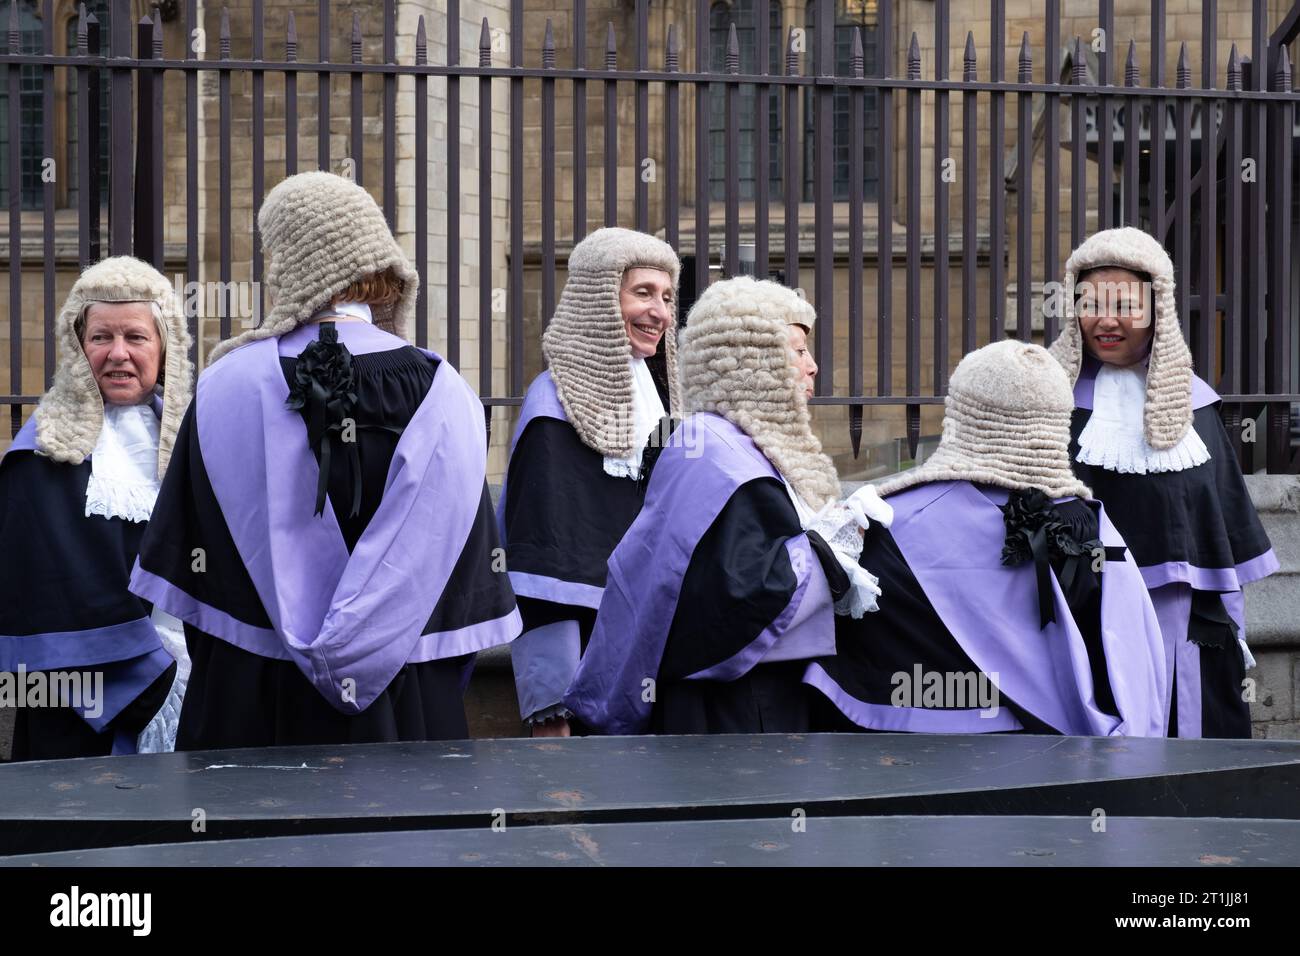 Lord Chancellor's Breakfast. Judges walk from Westminster Abbey to the House of Parliament, London UK. Stock Photo